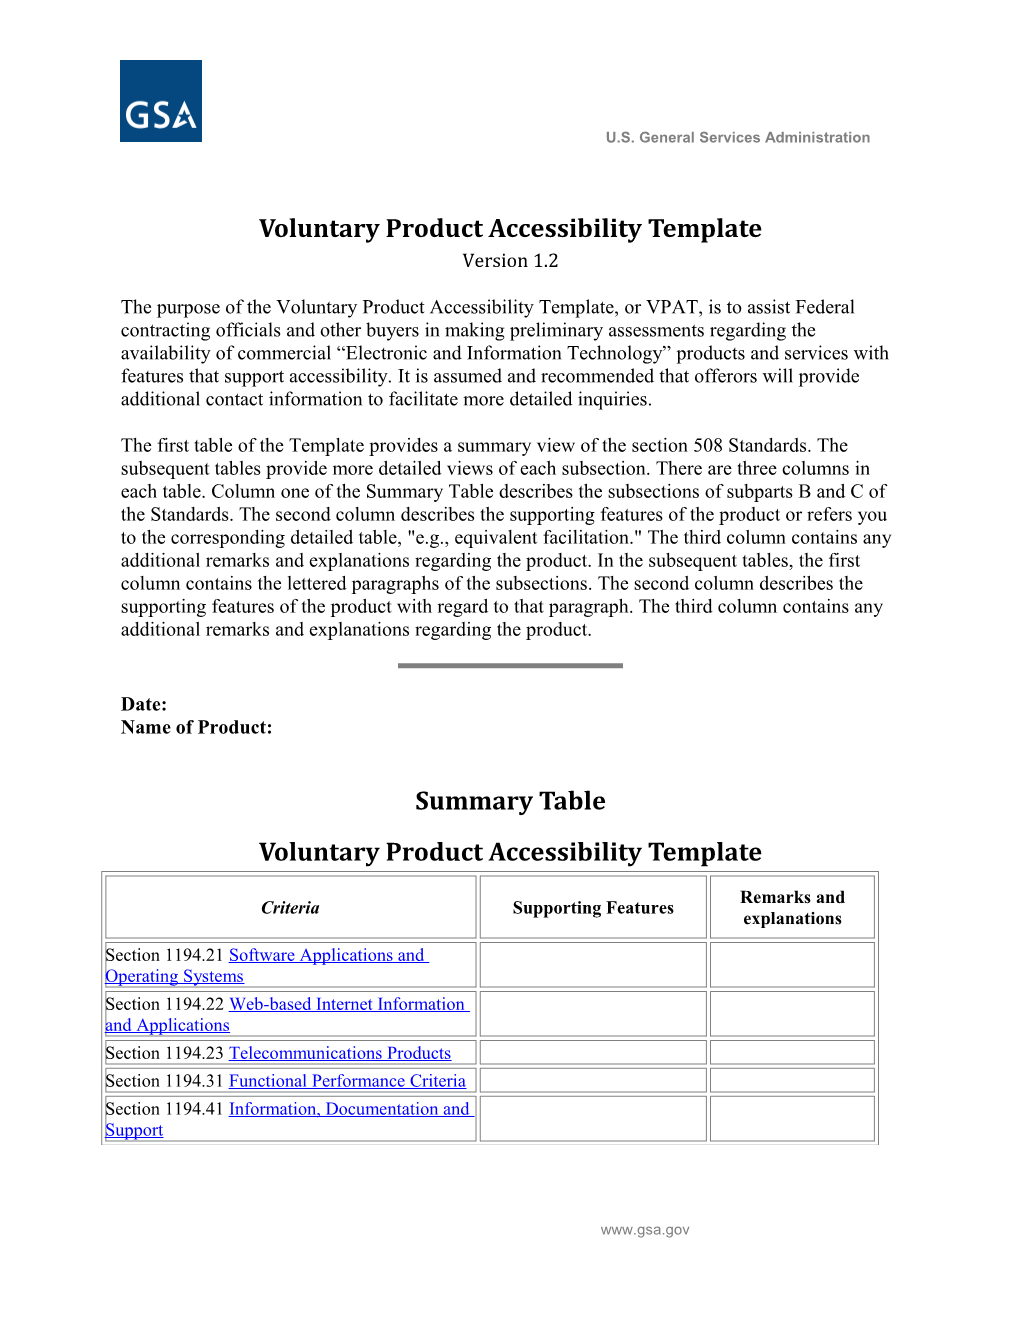 Voluntary Product Accessibility Template s1